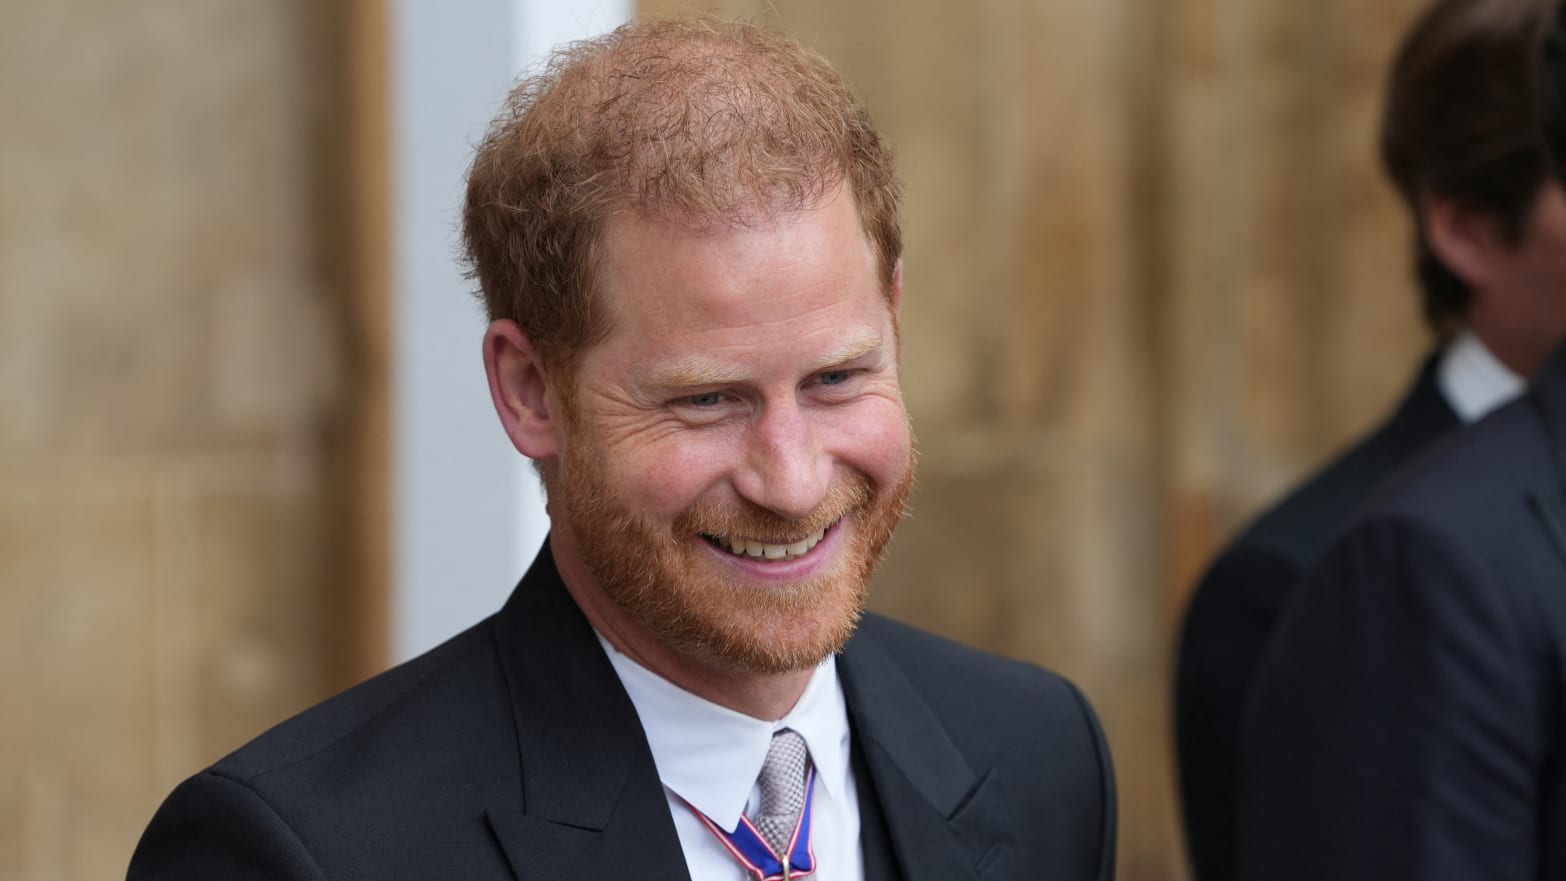 Prince Harry leaves after the Coronation of King Charles III, at Westminster Abbey, in London, Britain May 6, 2023.